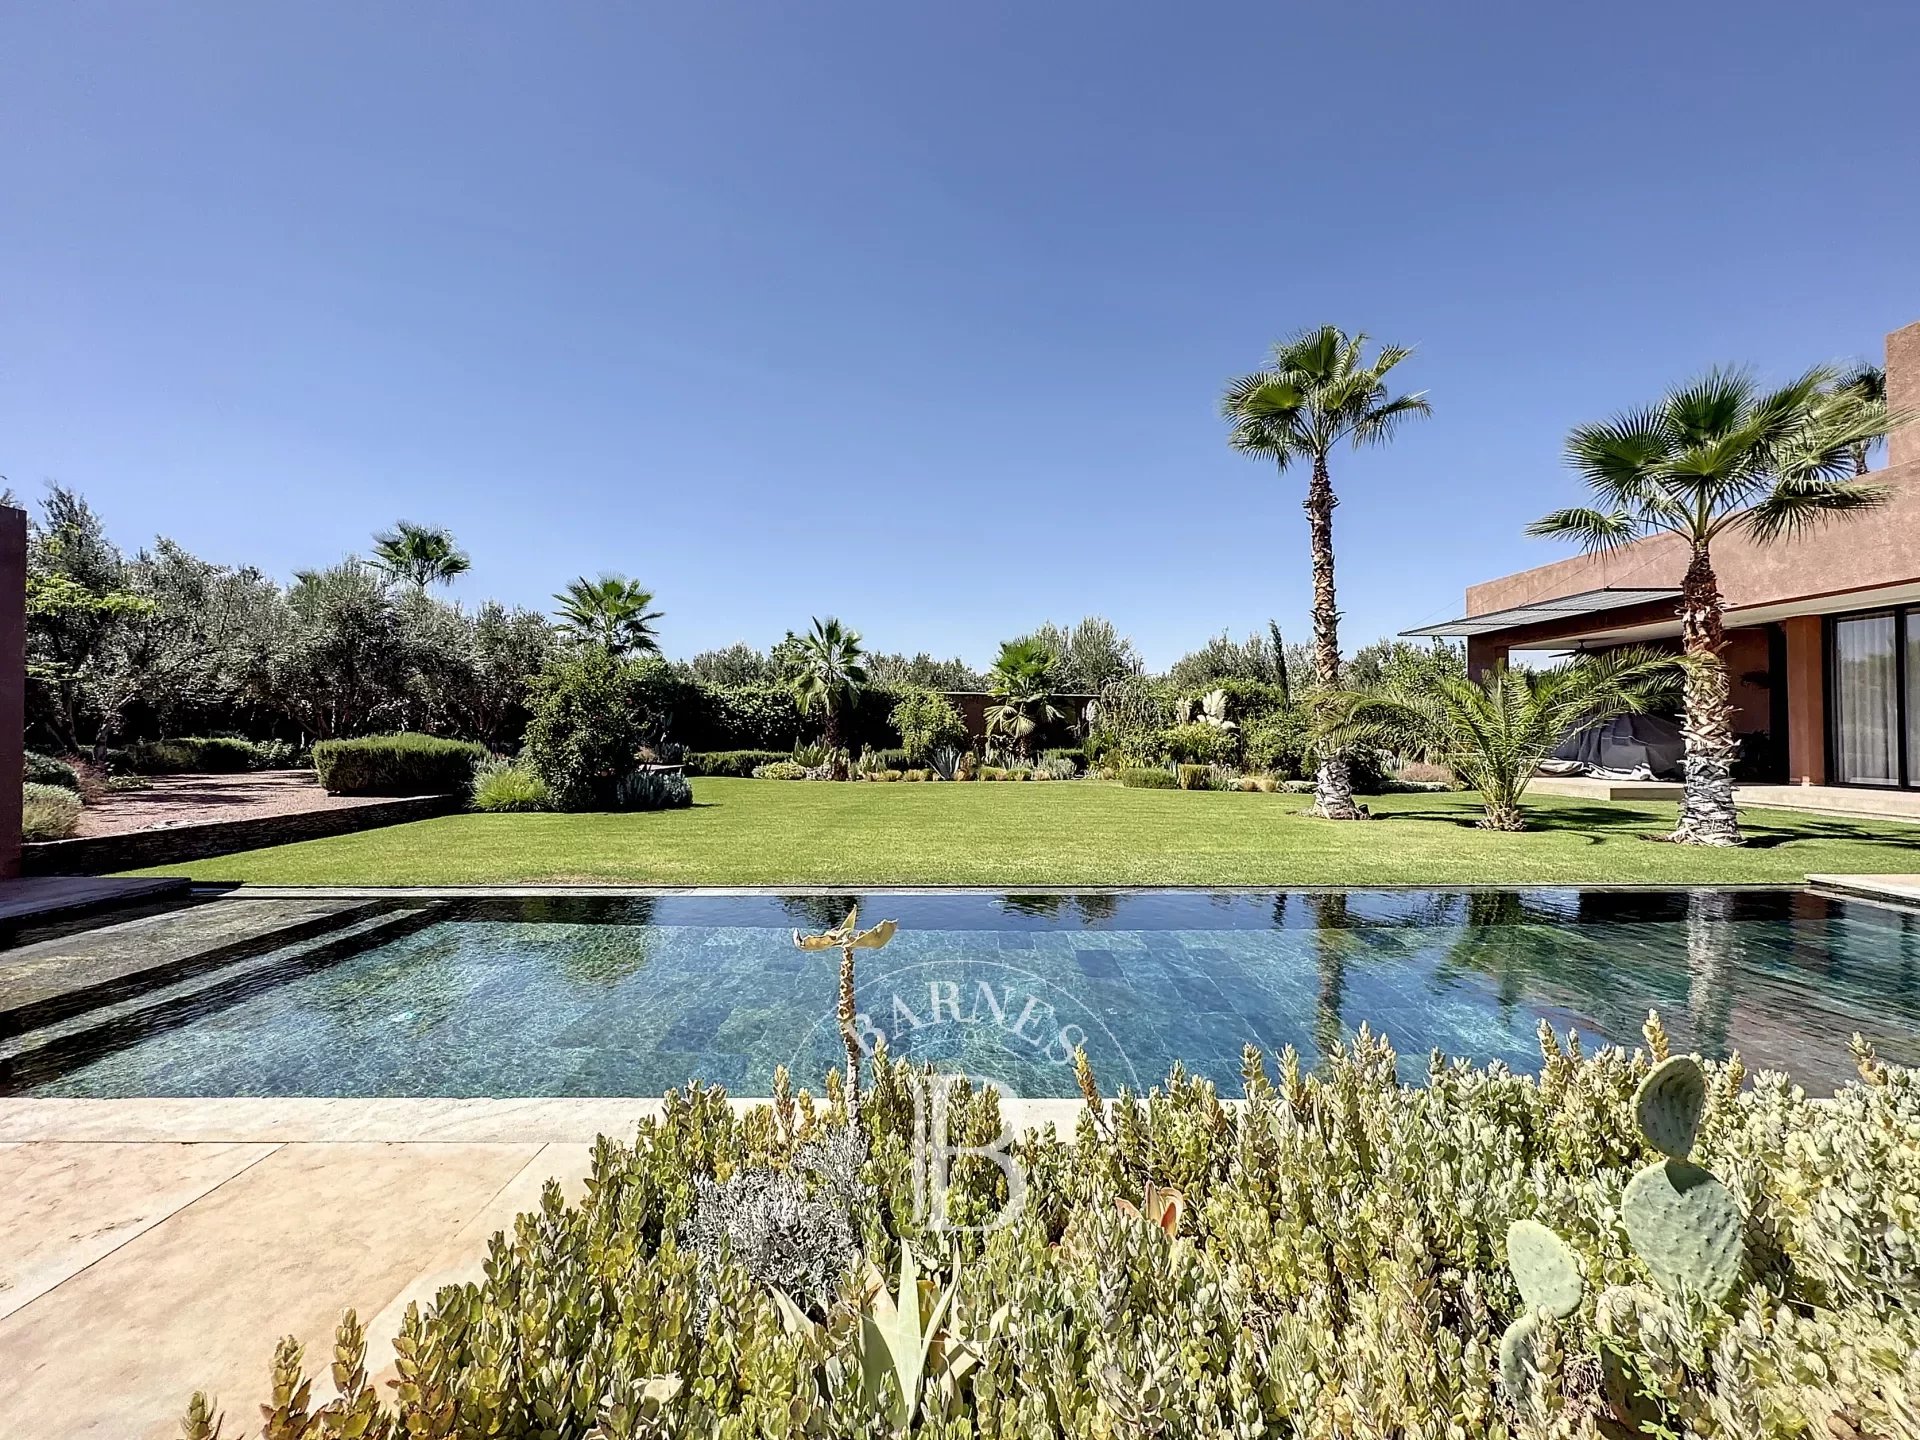 Luxury contemporary villa with infinity pool for sale on the Ourika road in Marrakech.